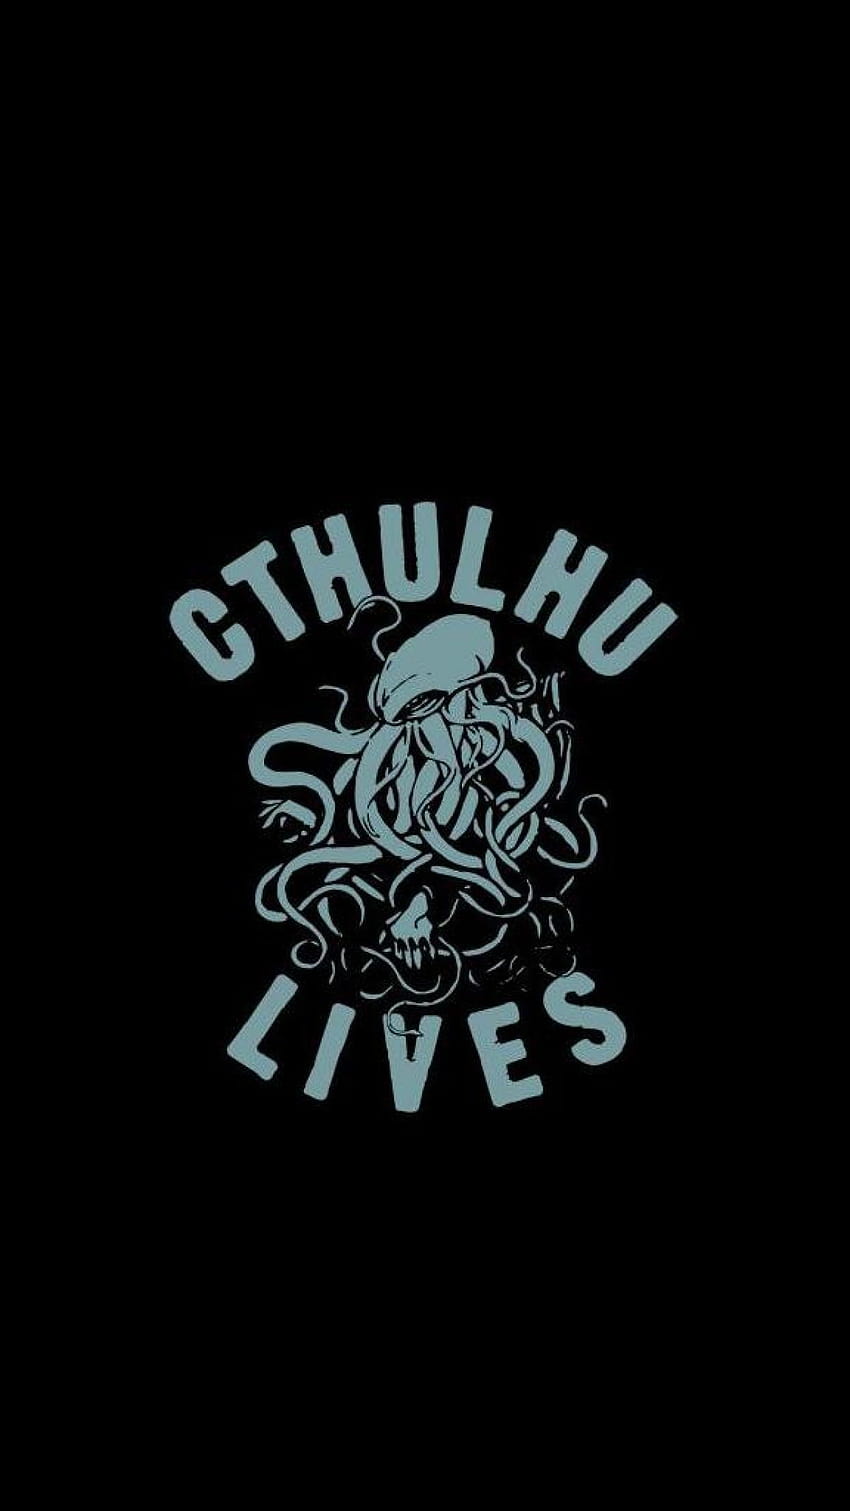 Cthulhu Cthulhu is a cosmic entity created by writer h p lovecraft HD phone wallpaper